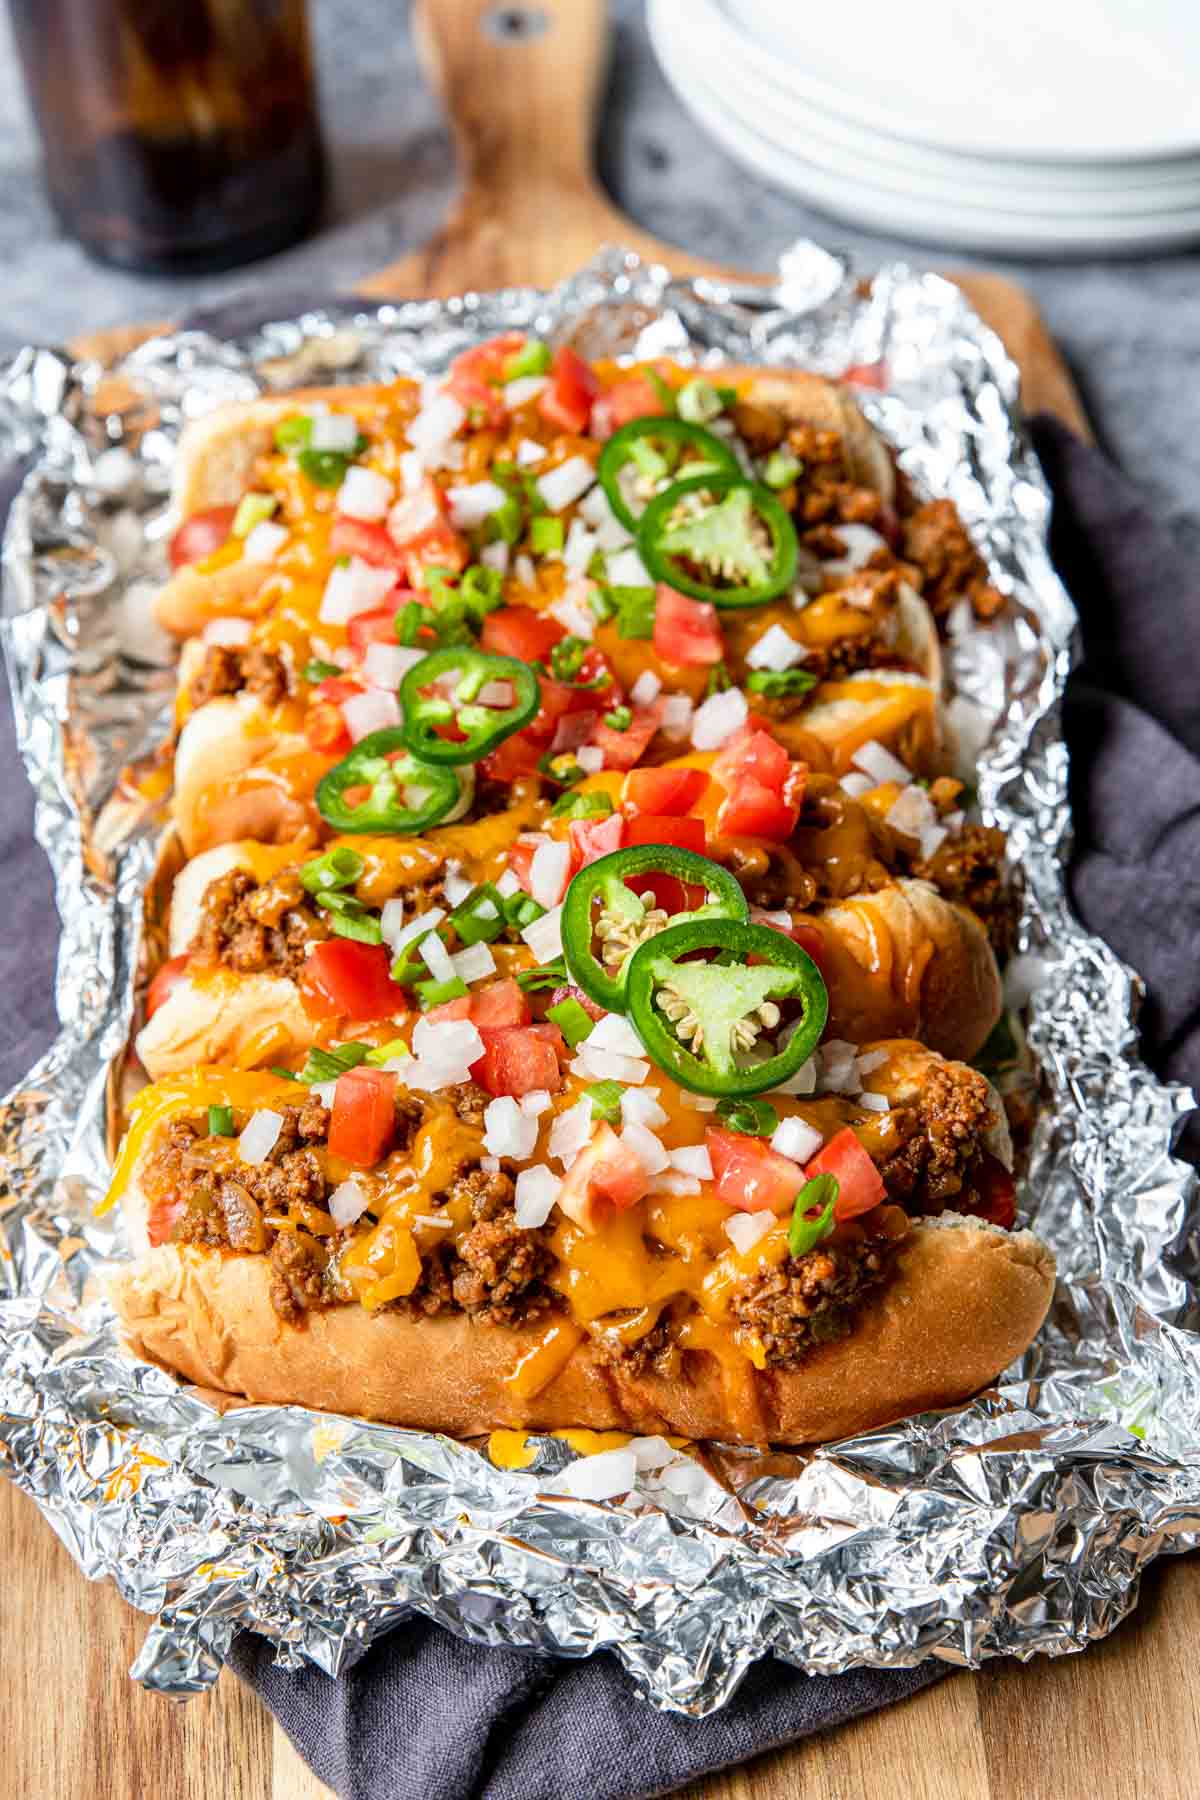 chili cheese dogs with all the toppings in a foil packet